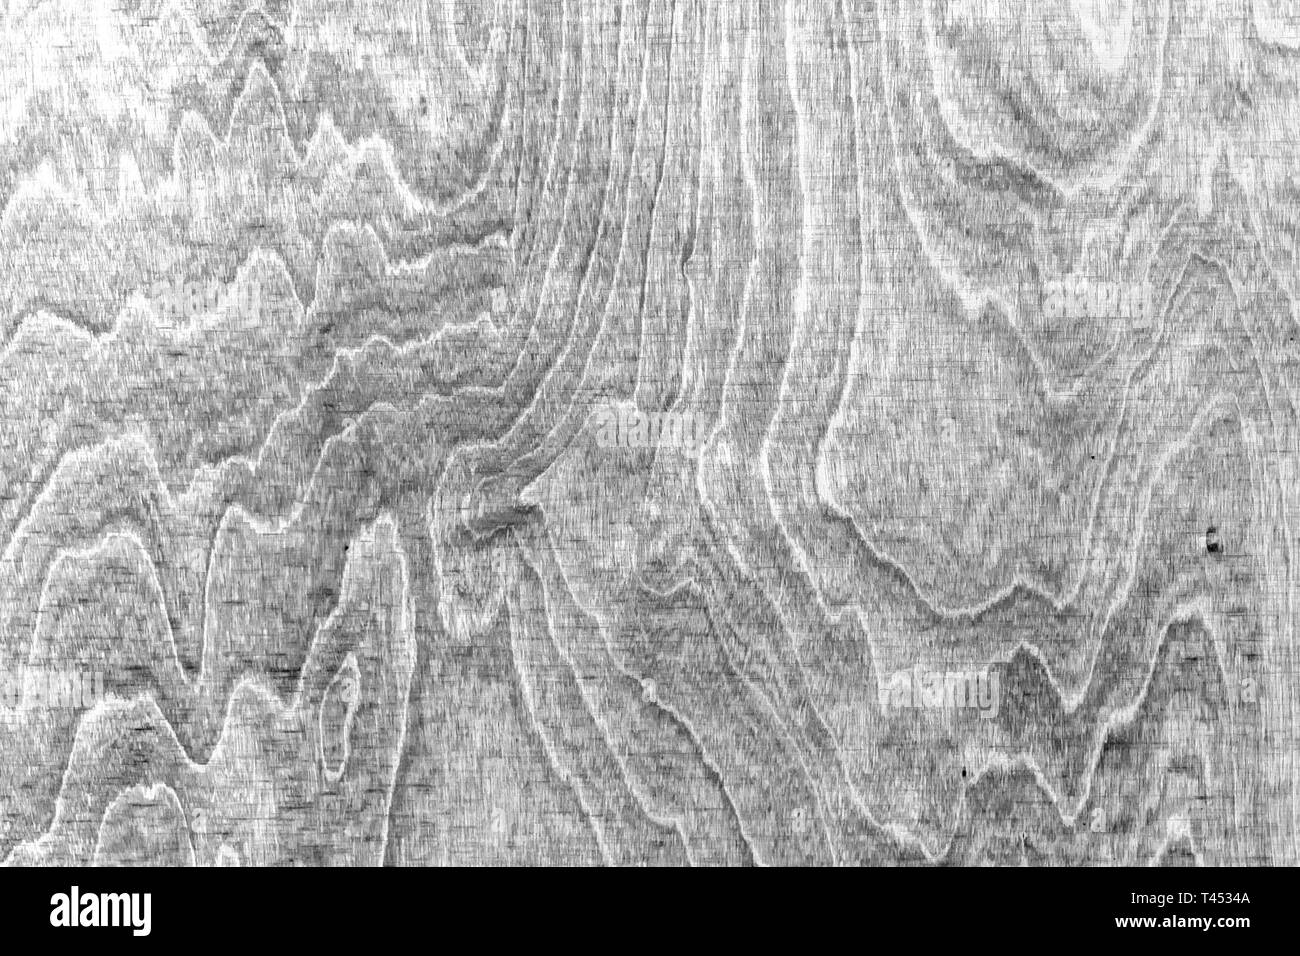 black and white wooden plywood textured background natural material Stock Photo